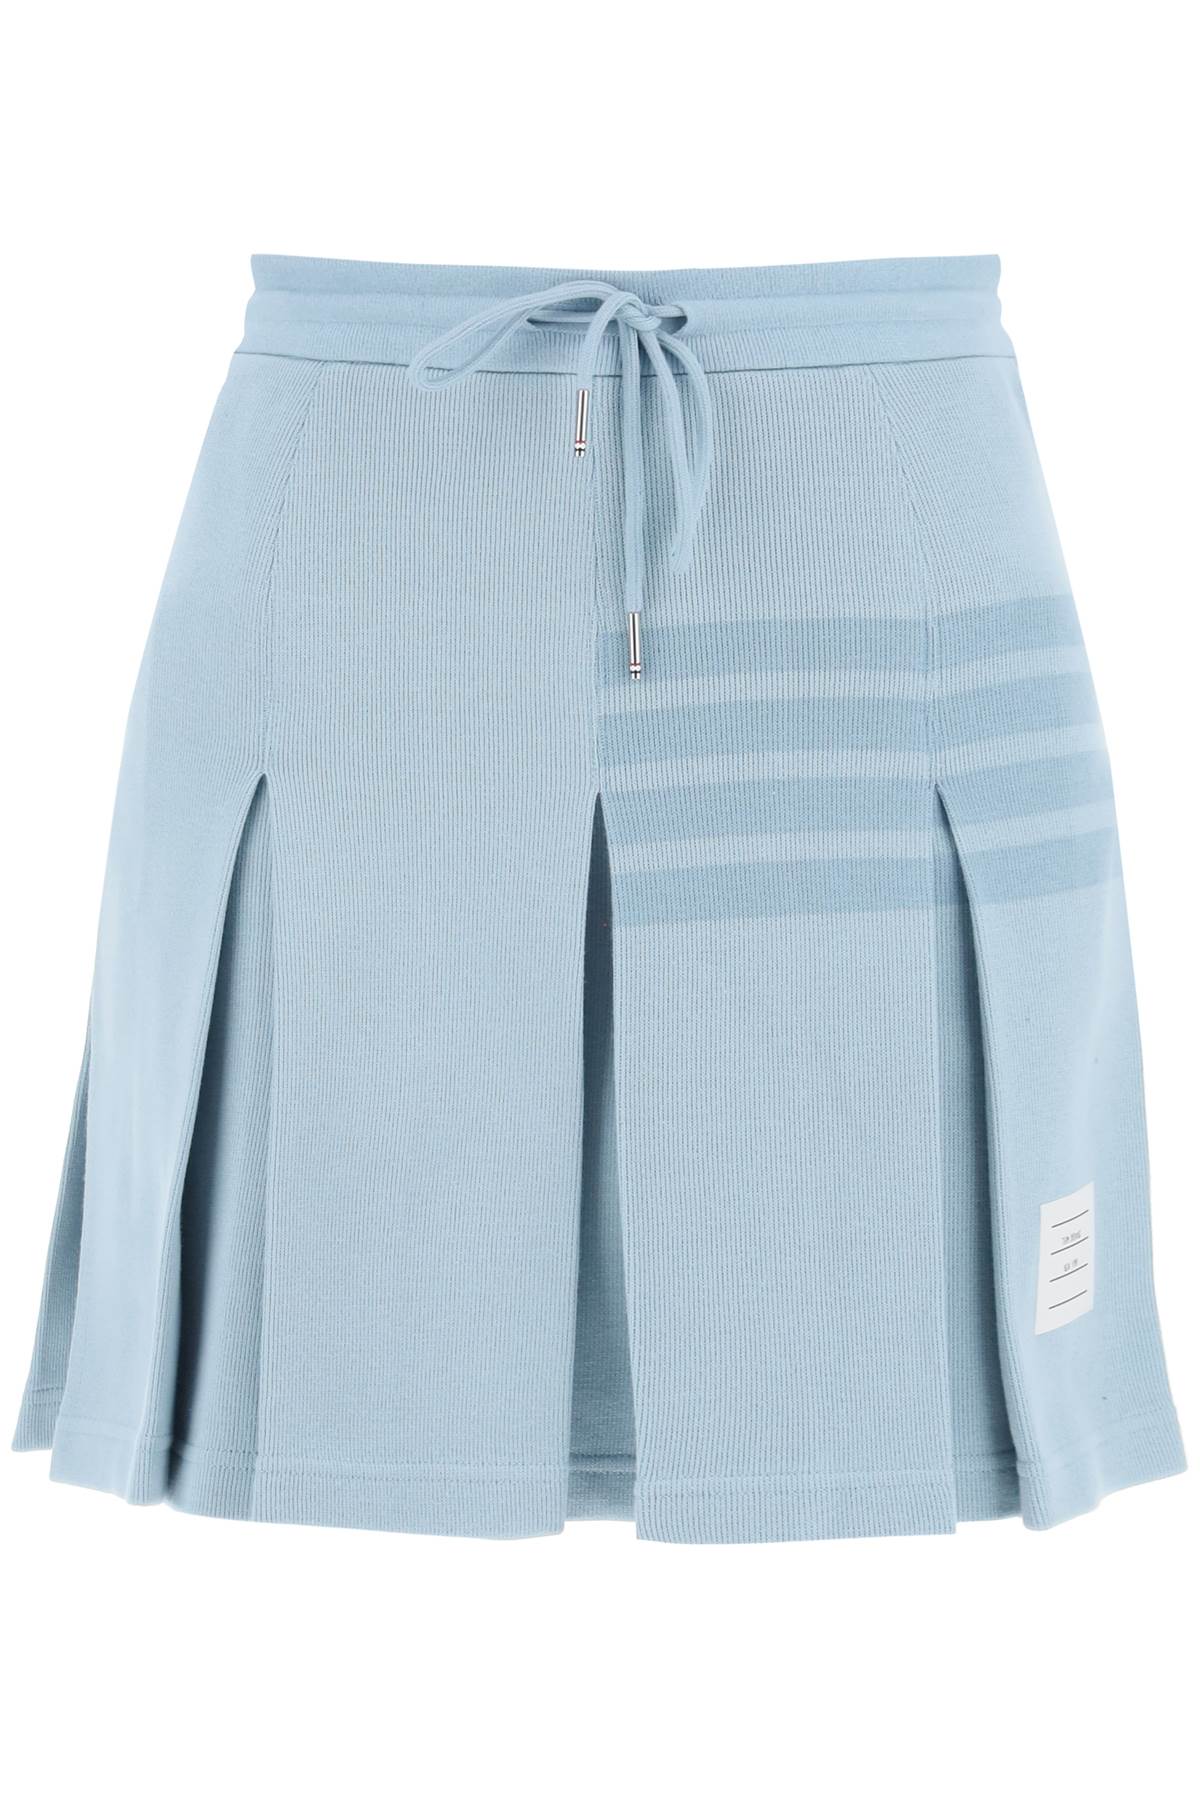 Thom browne knitted 4-bar pleated skirt-0